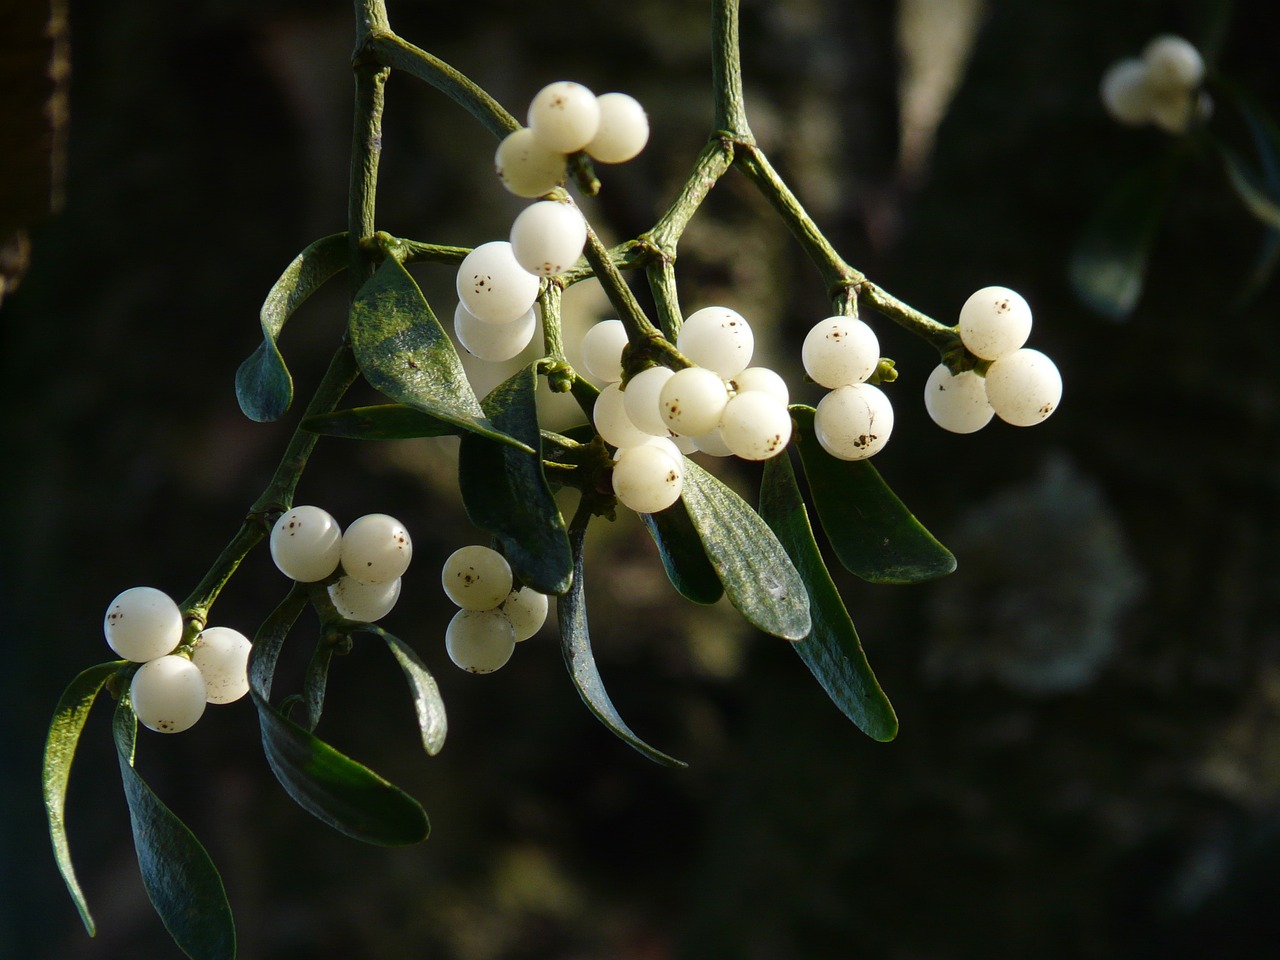 A bunch of mistletoe leaves and berries hanging from a tree.